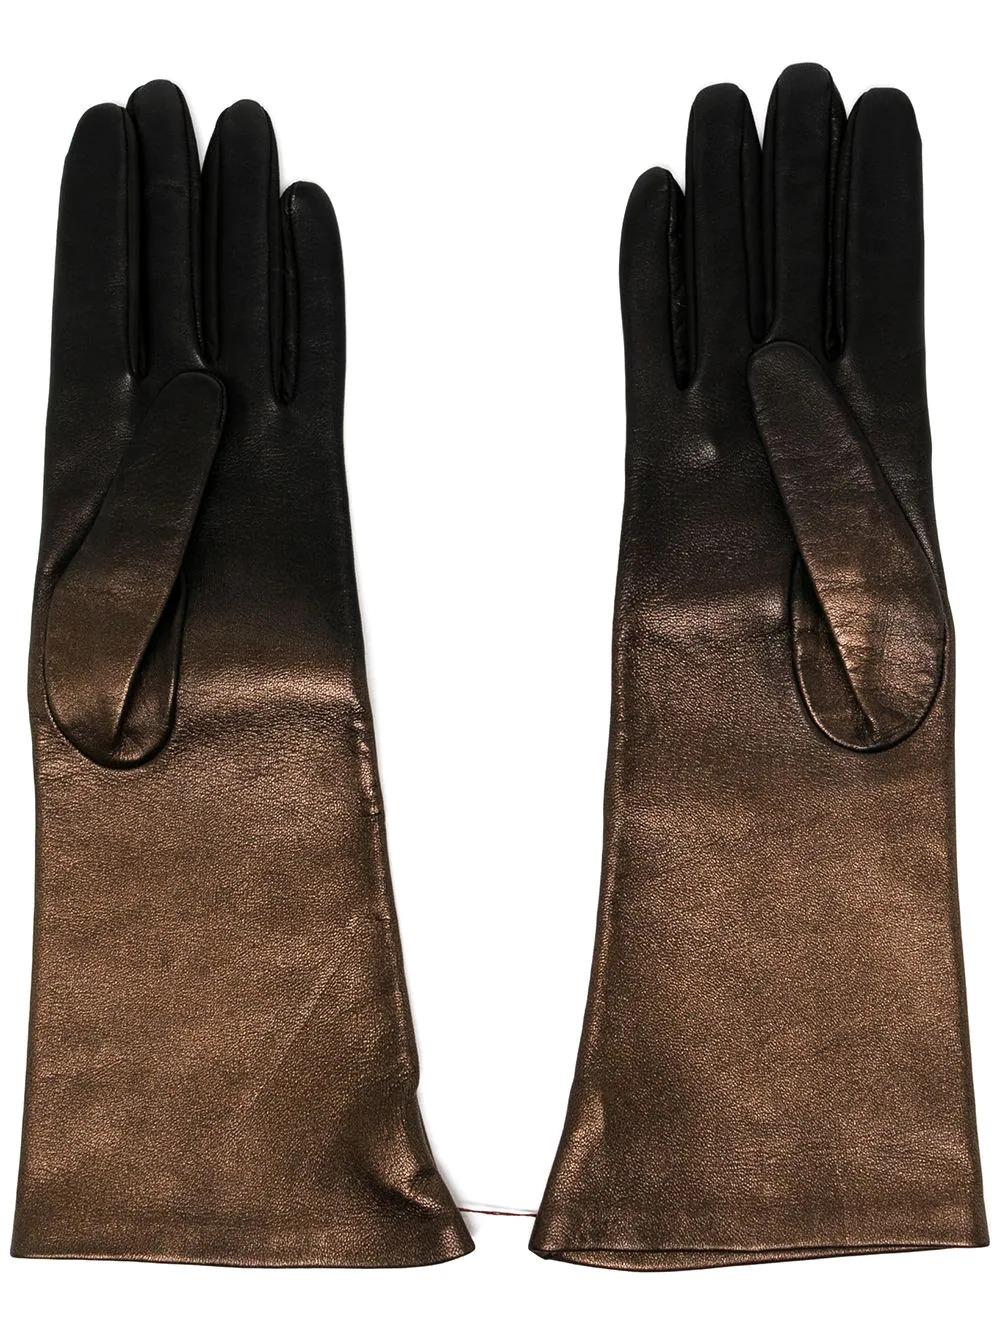 Crafted from soft leather, these 2018 pre-owned metallic Chanel gloves are all you need to keep your hands warm throughout winter. These gloves feature a unique ombre design, starting from metallic bronze up to black on the fingertips. The mid-arm